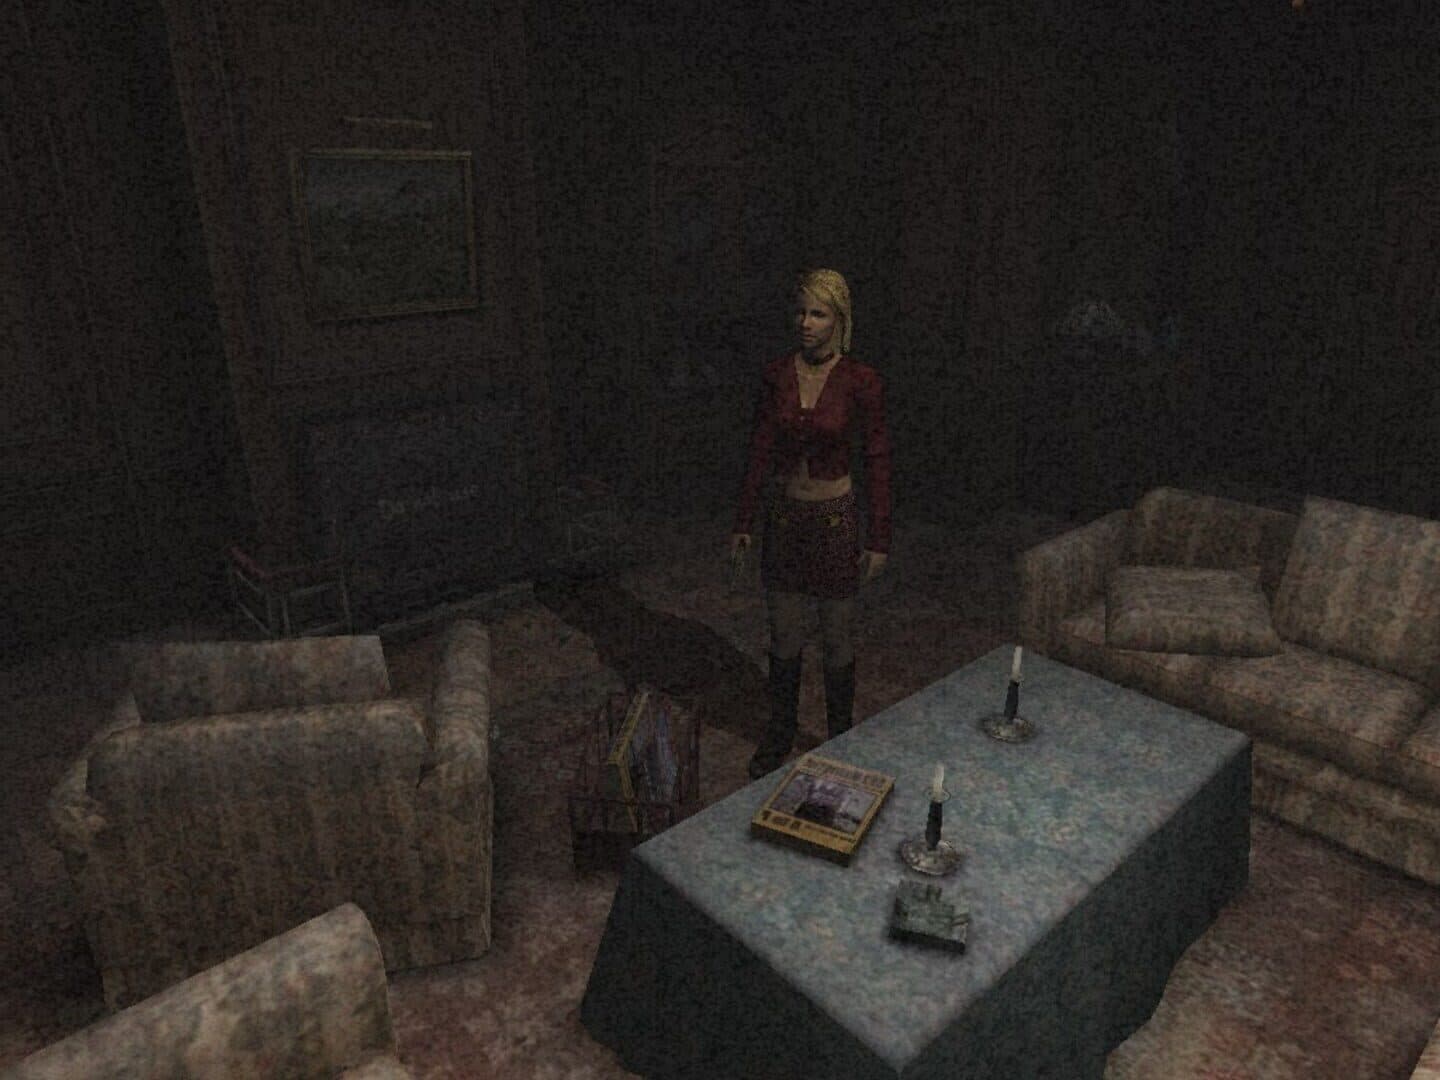 Silent Hill 2: Restless Dreams Image